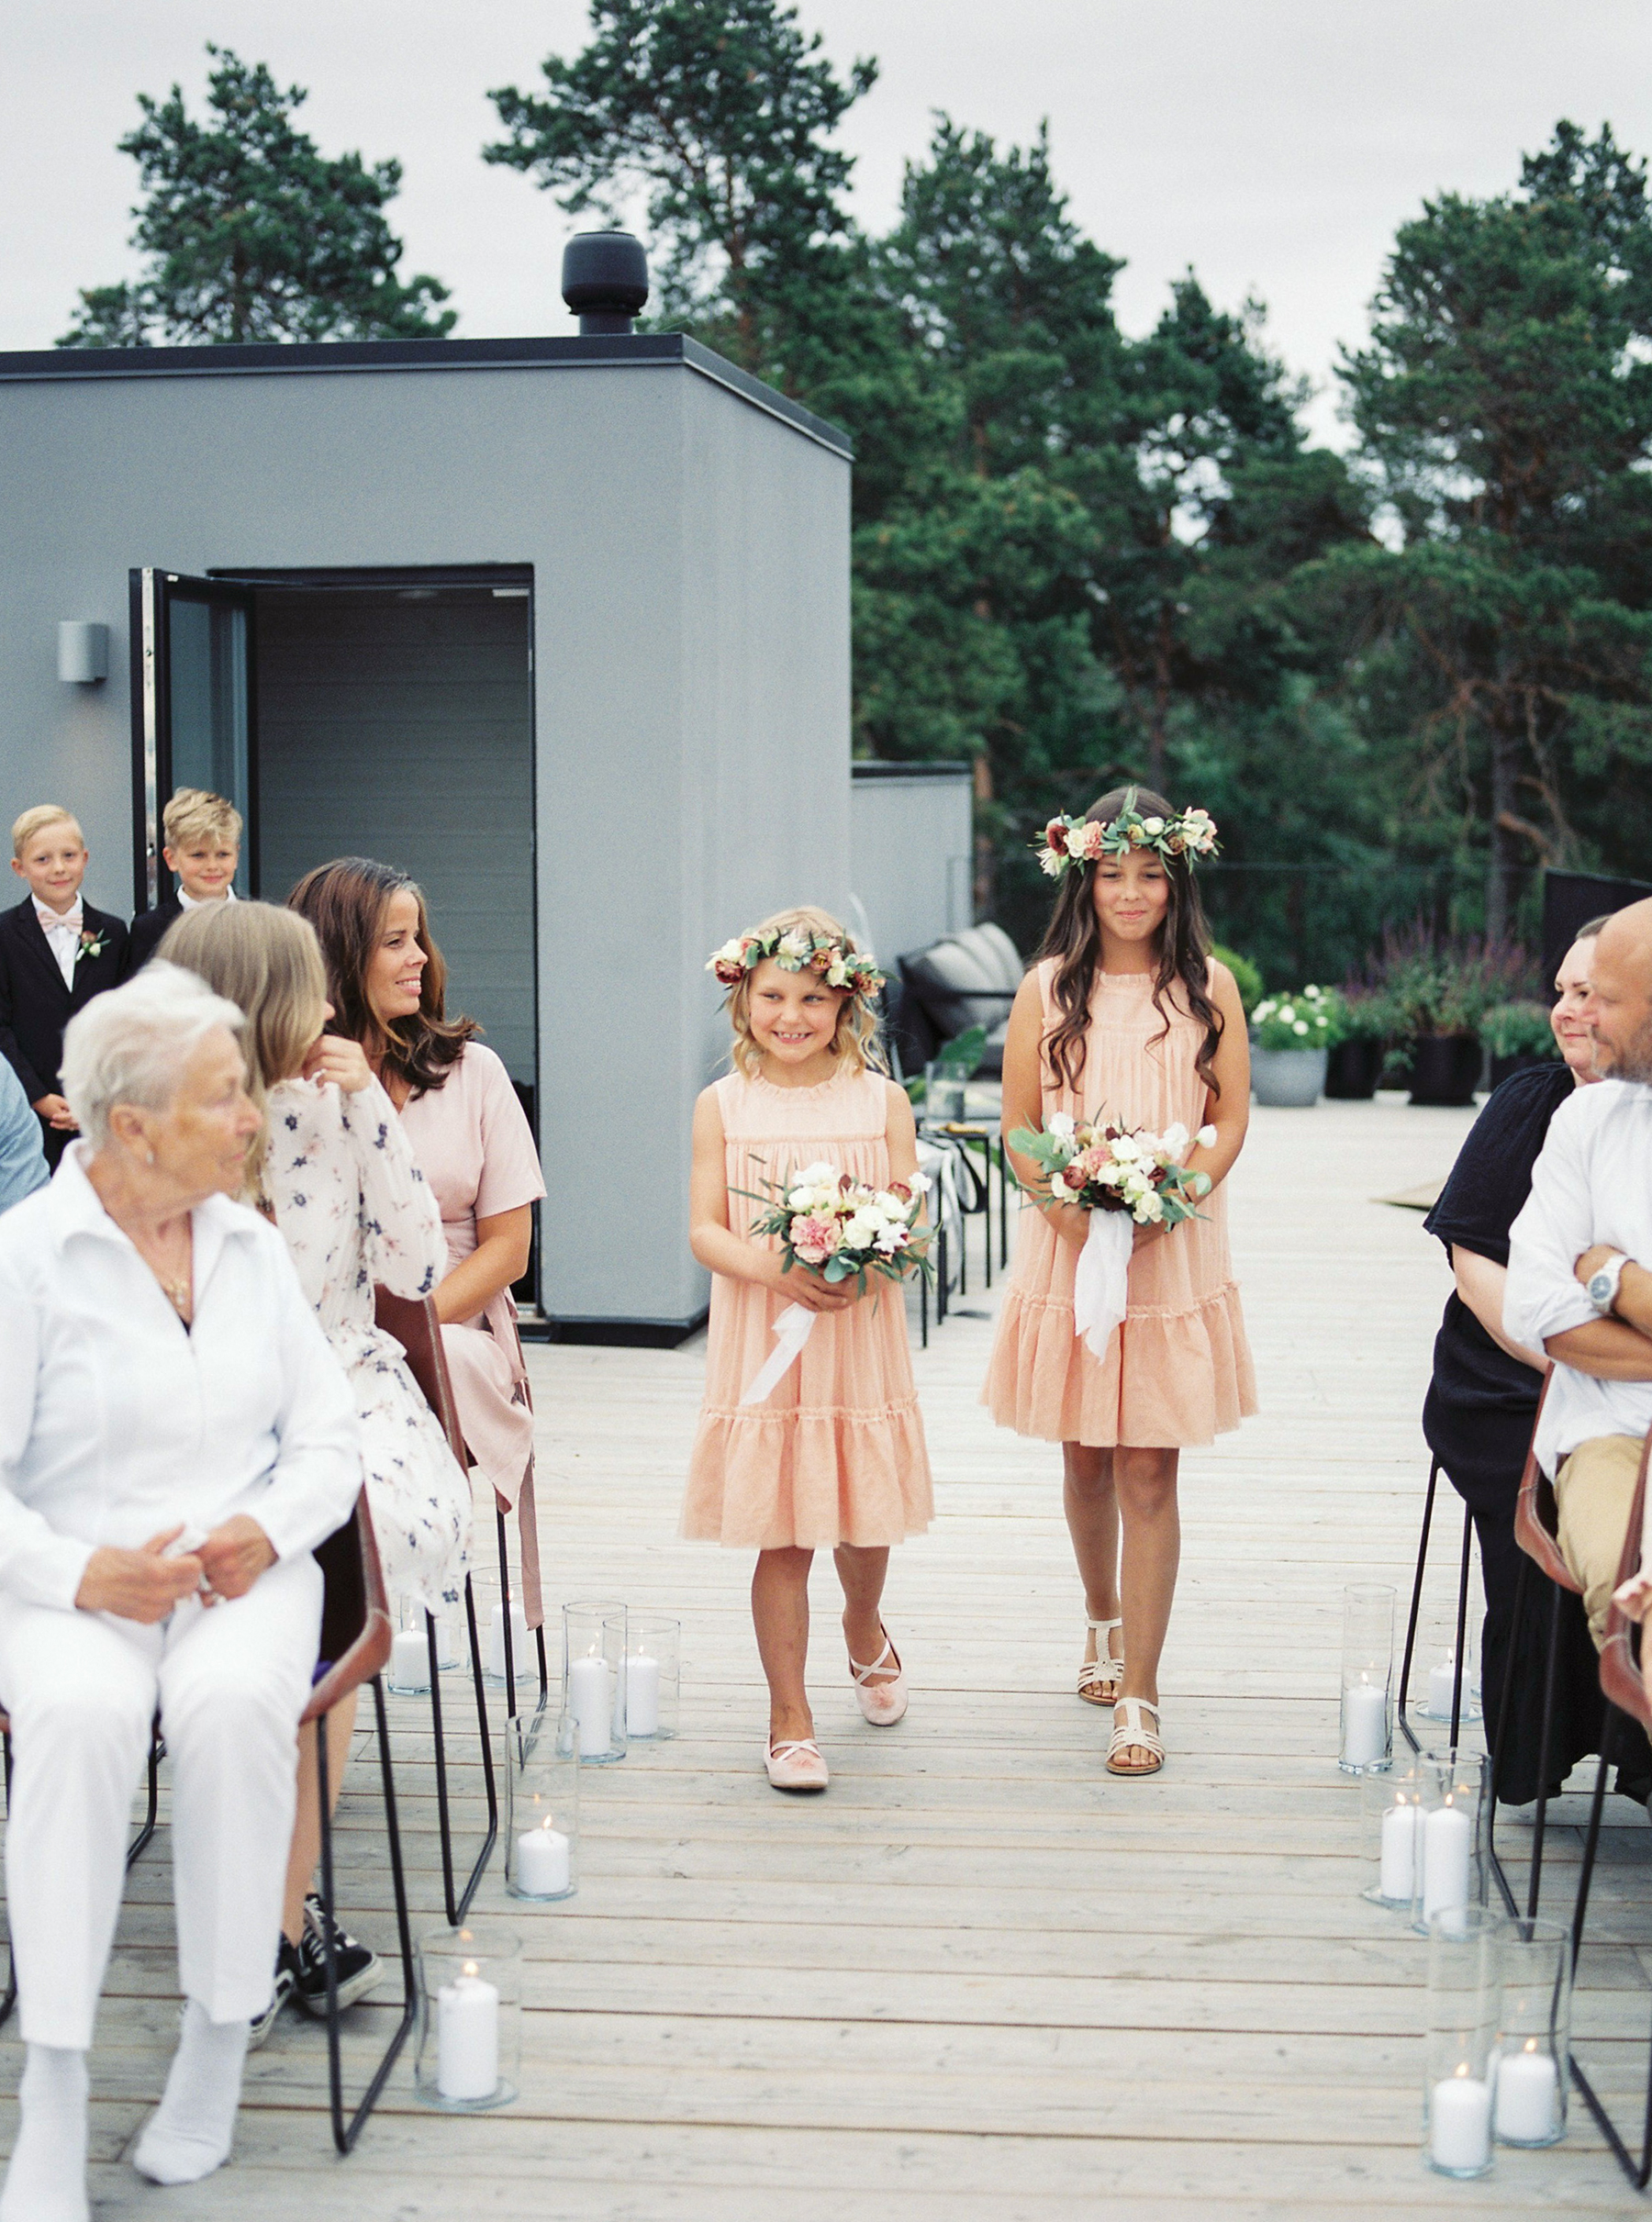 Bright and Warm Colored Wedding Inspiration in Sweden 2 Brides Photography10